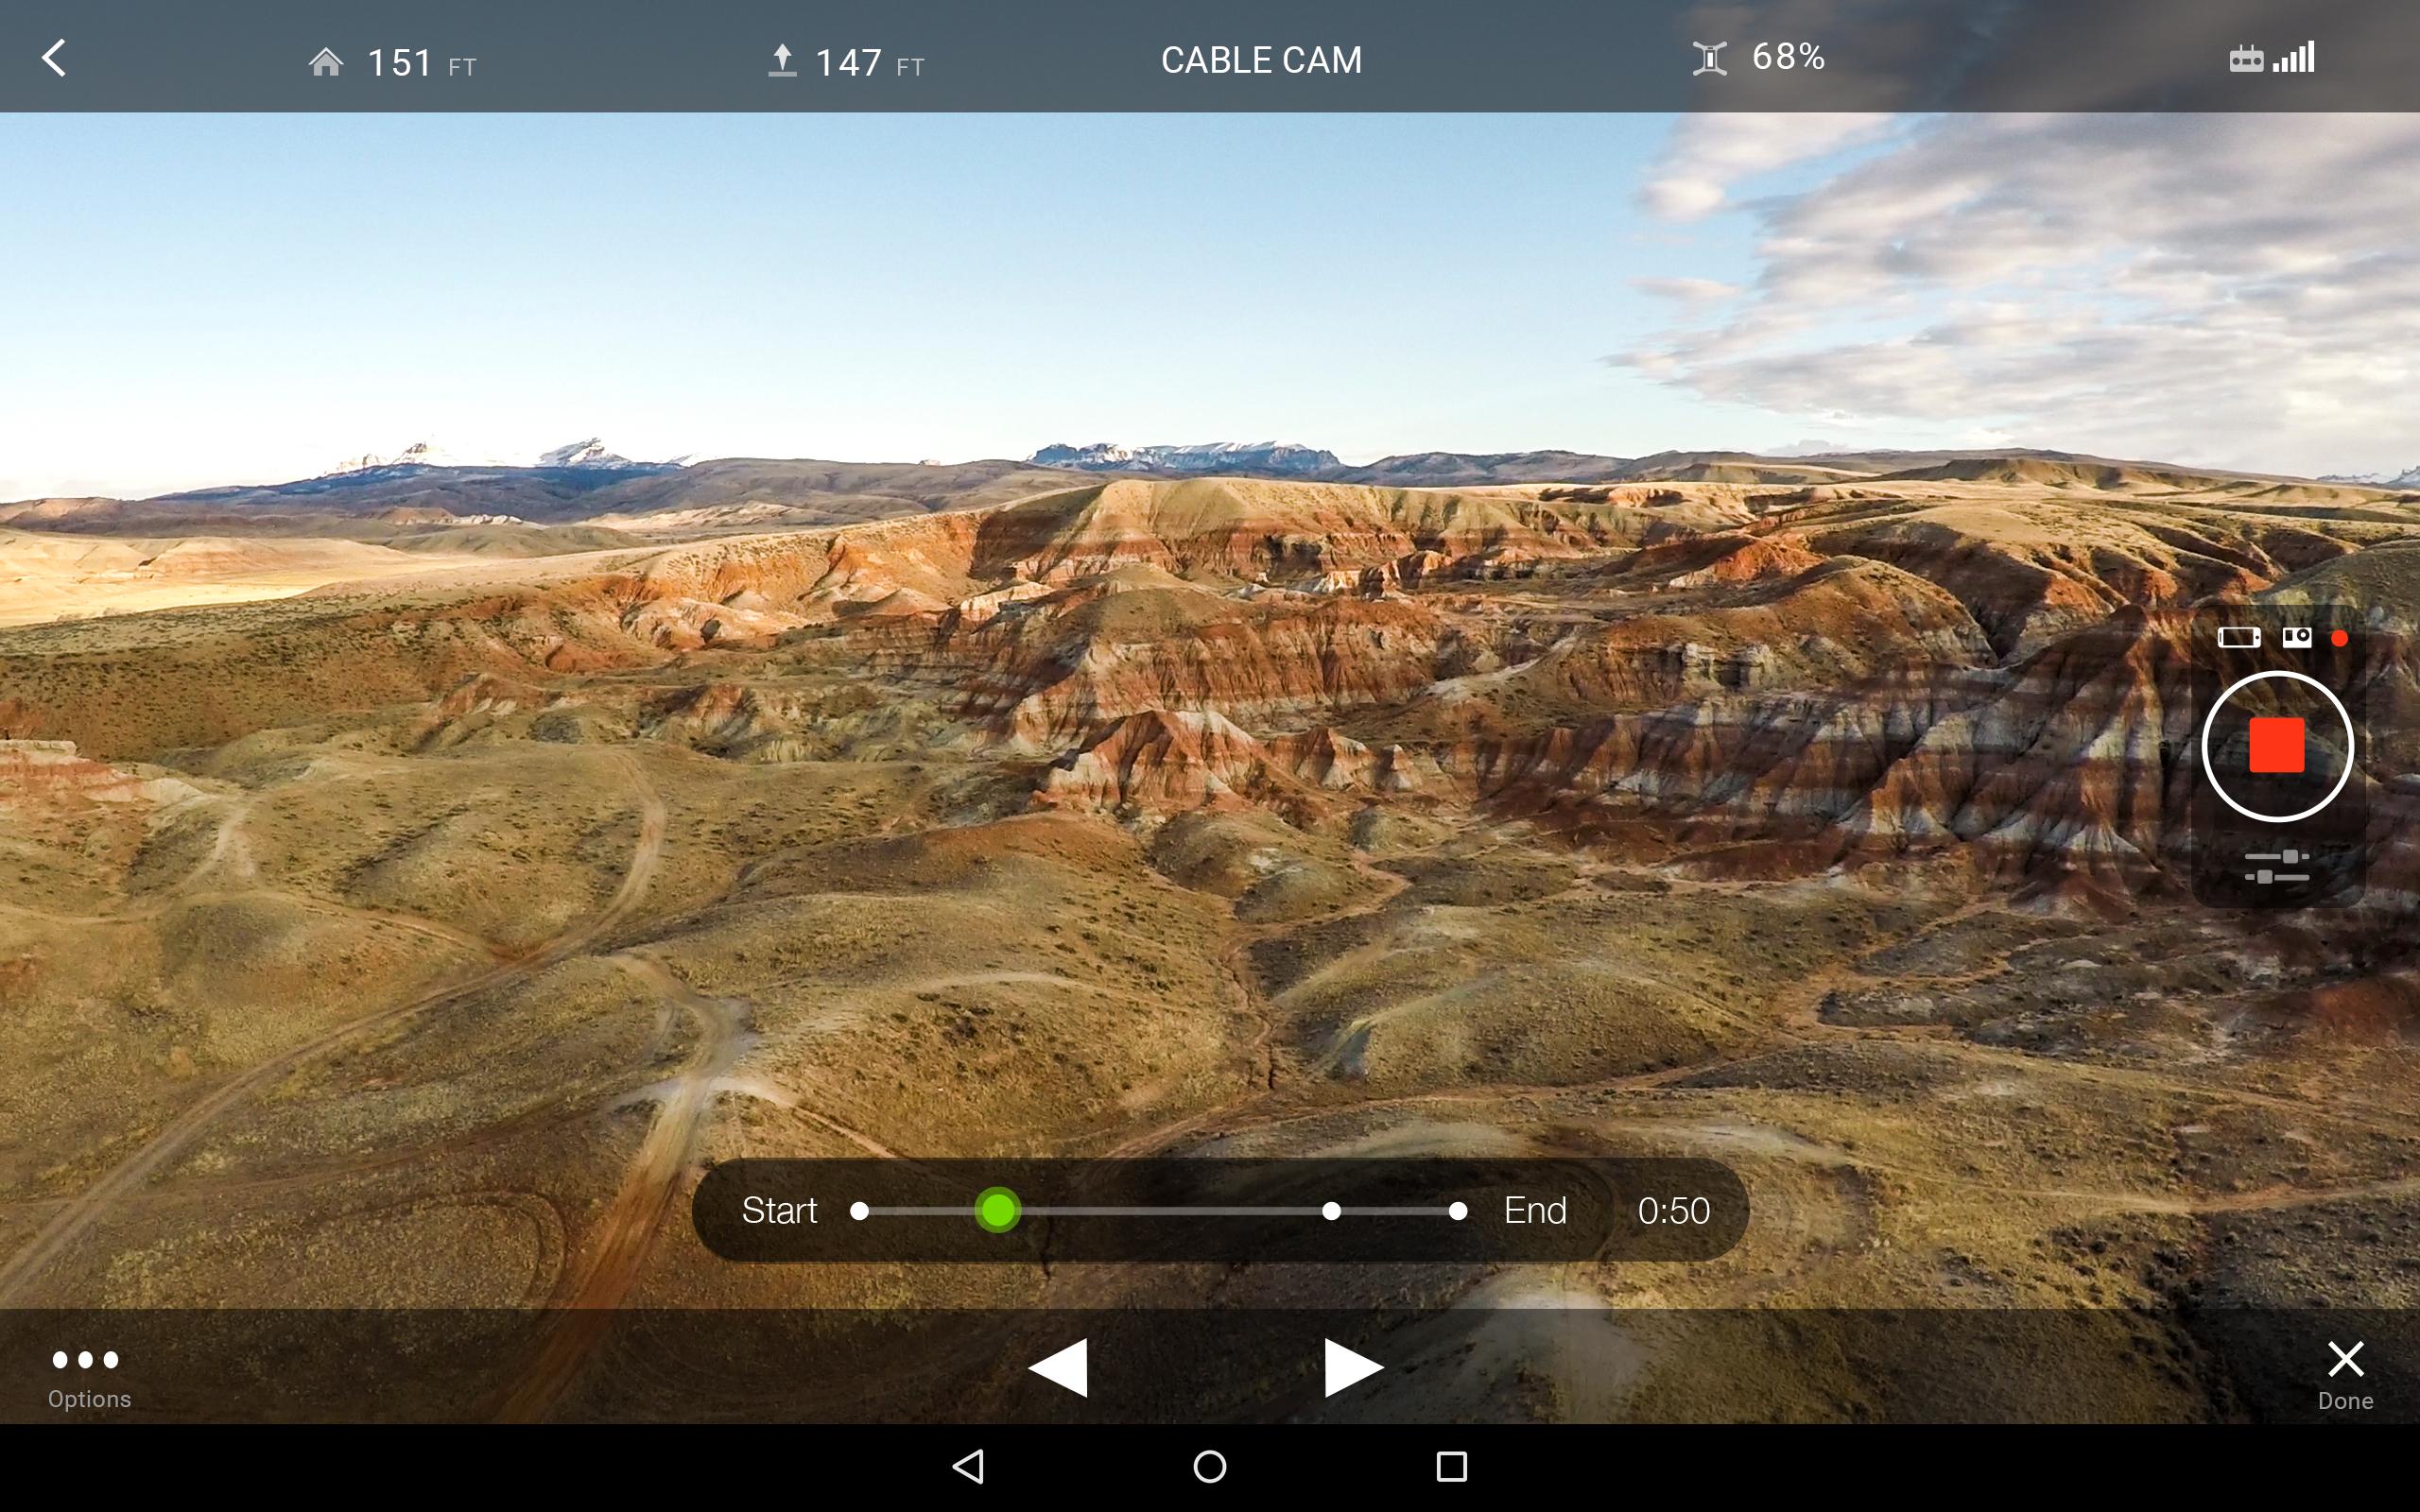 3DR Solo for Android - APK Download